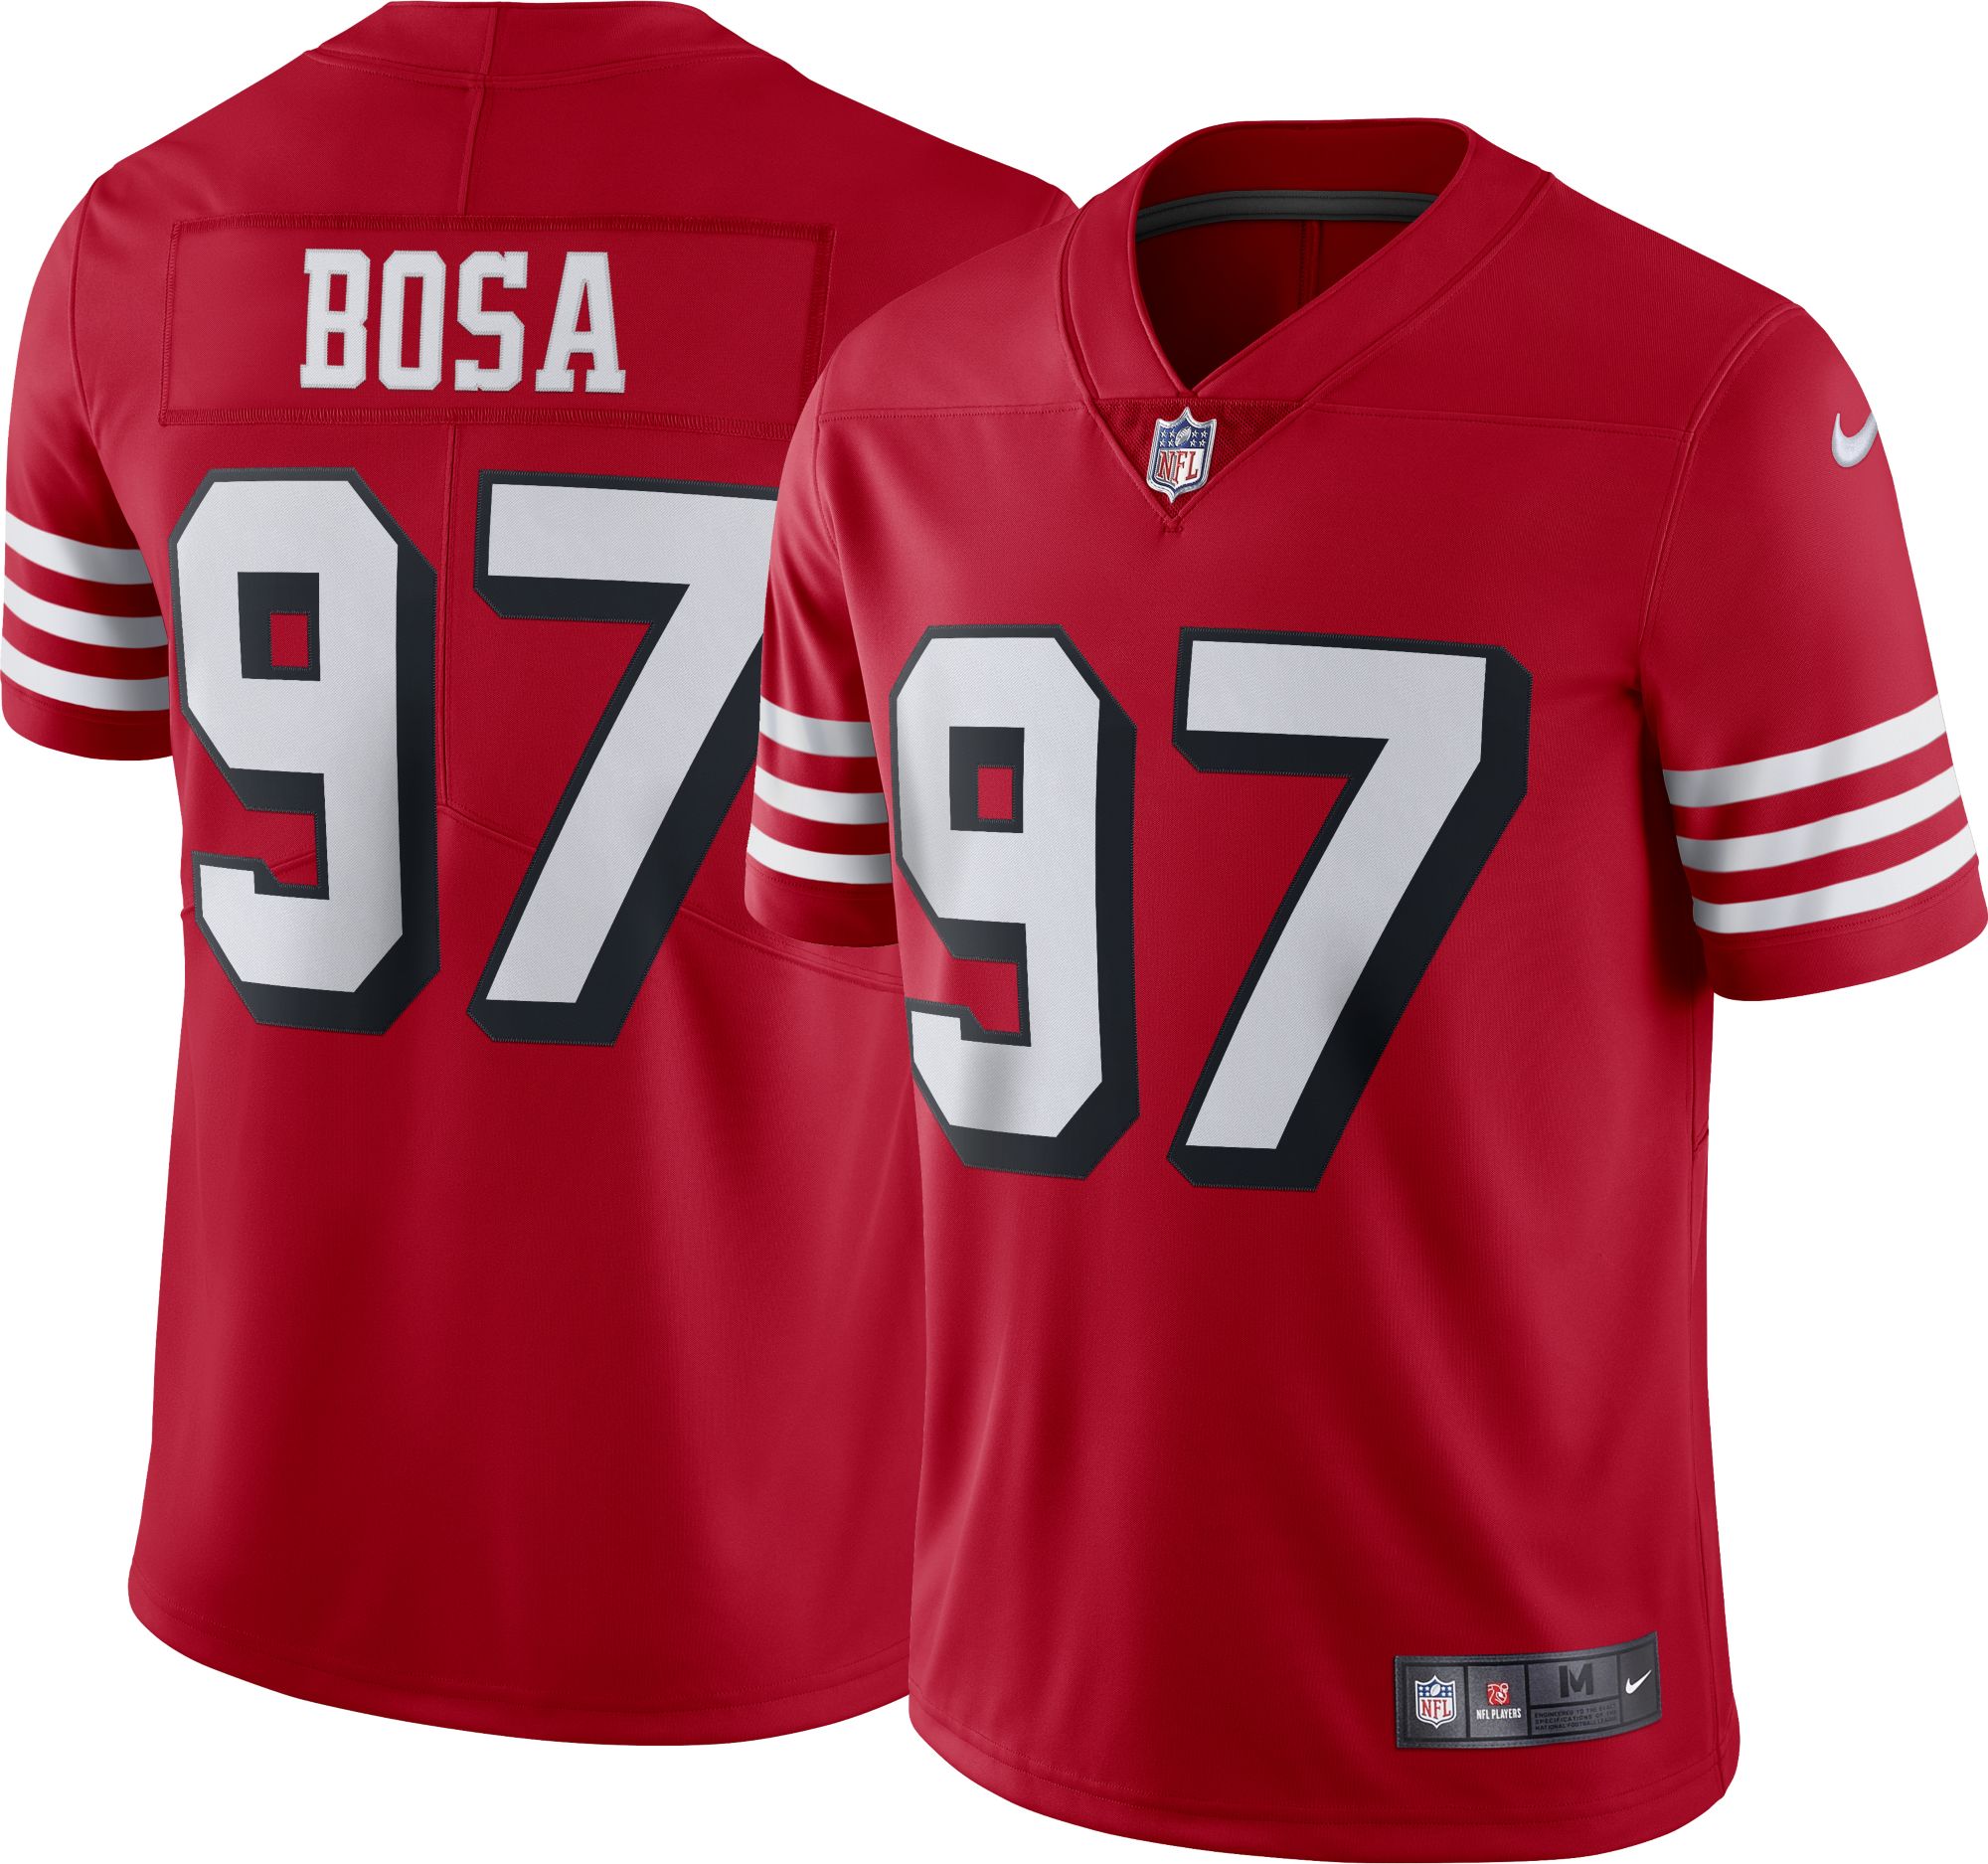 49ers 97 jersey